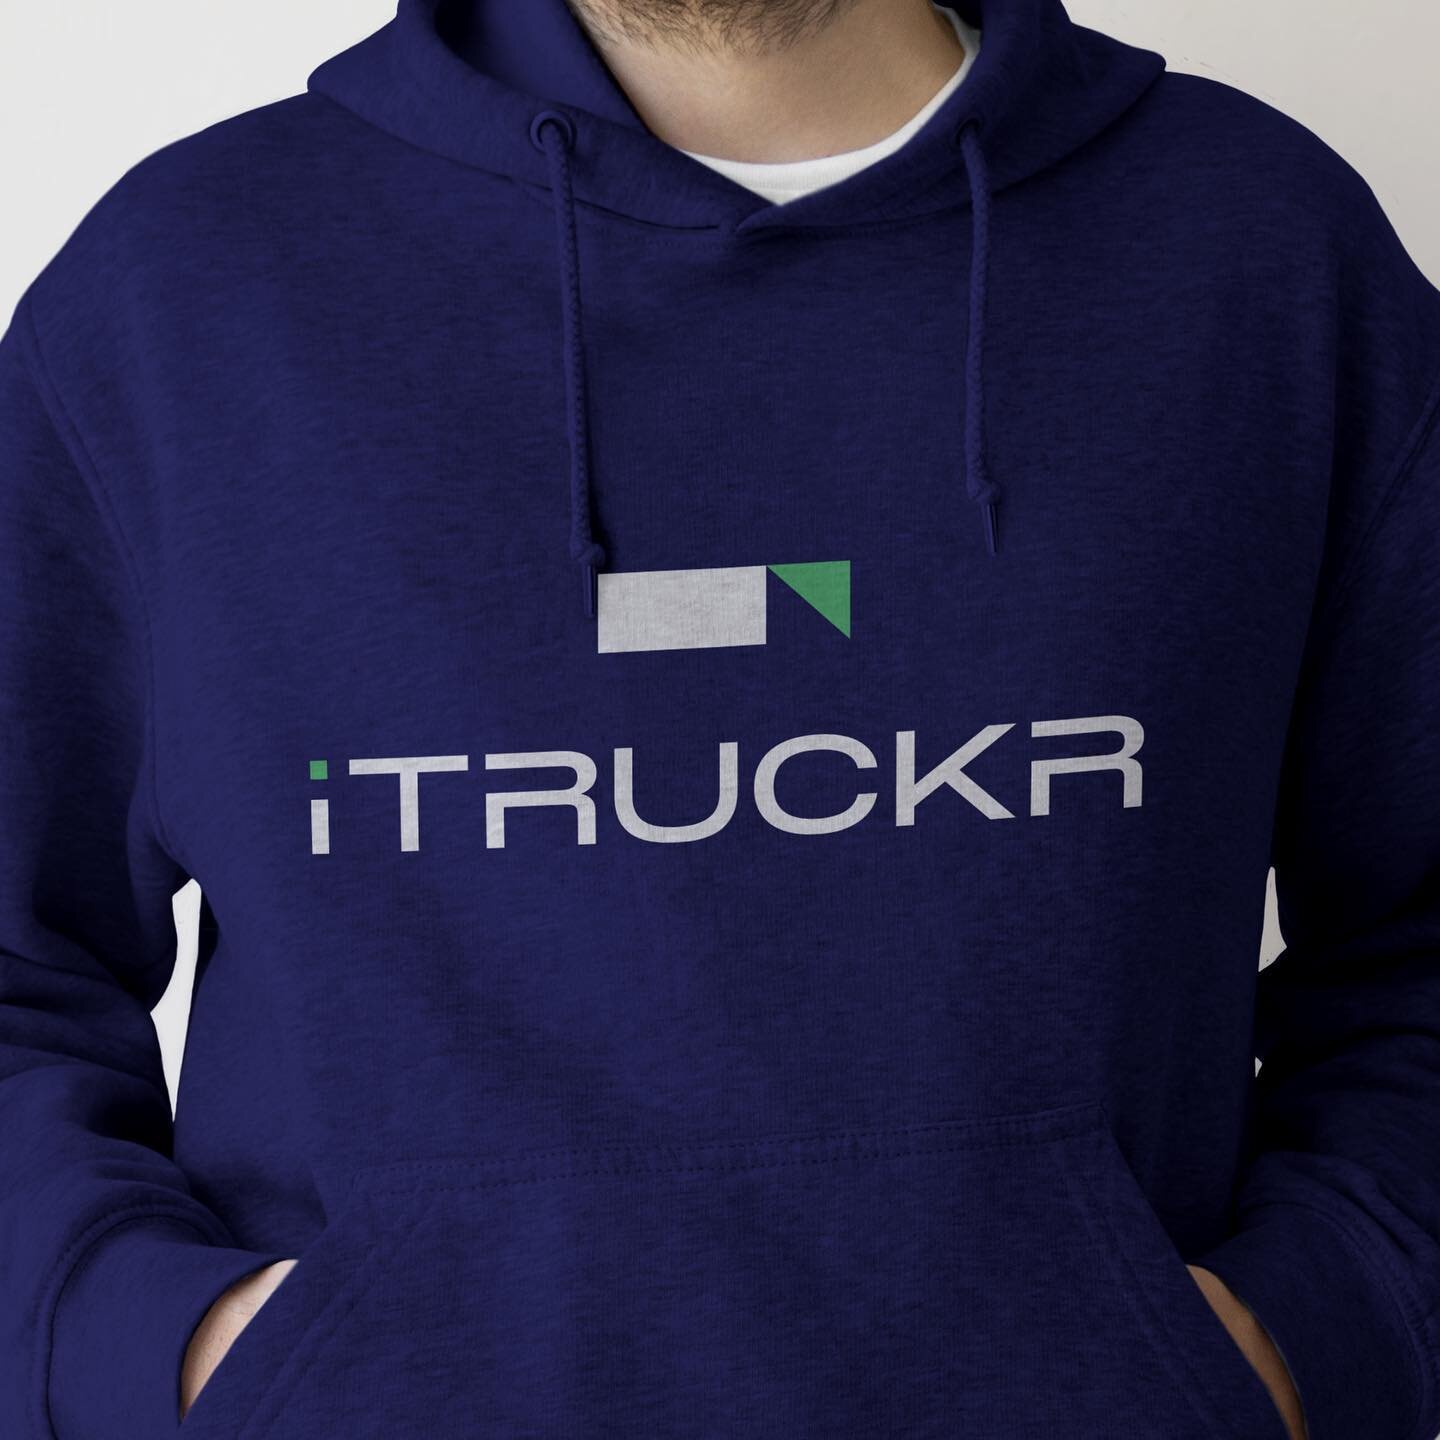 Truck drivers!! How cool is our merch? 🚛👕 Sign up to our waiting list to join our team and sport one of these hoodies whilst driving😏💪🏾 #itruckr #trucker